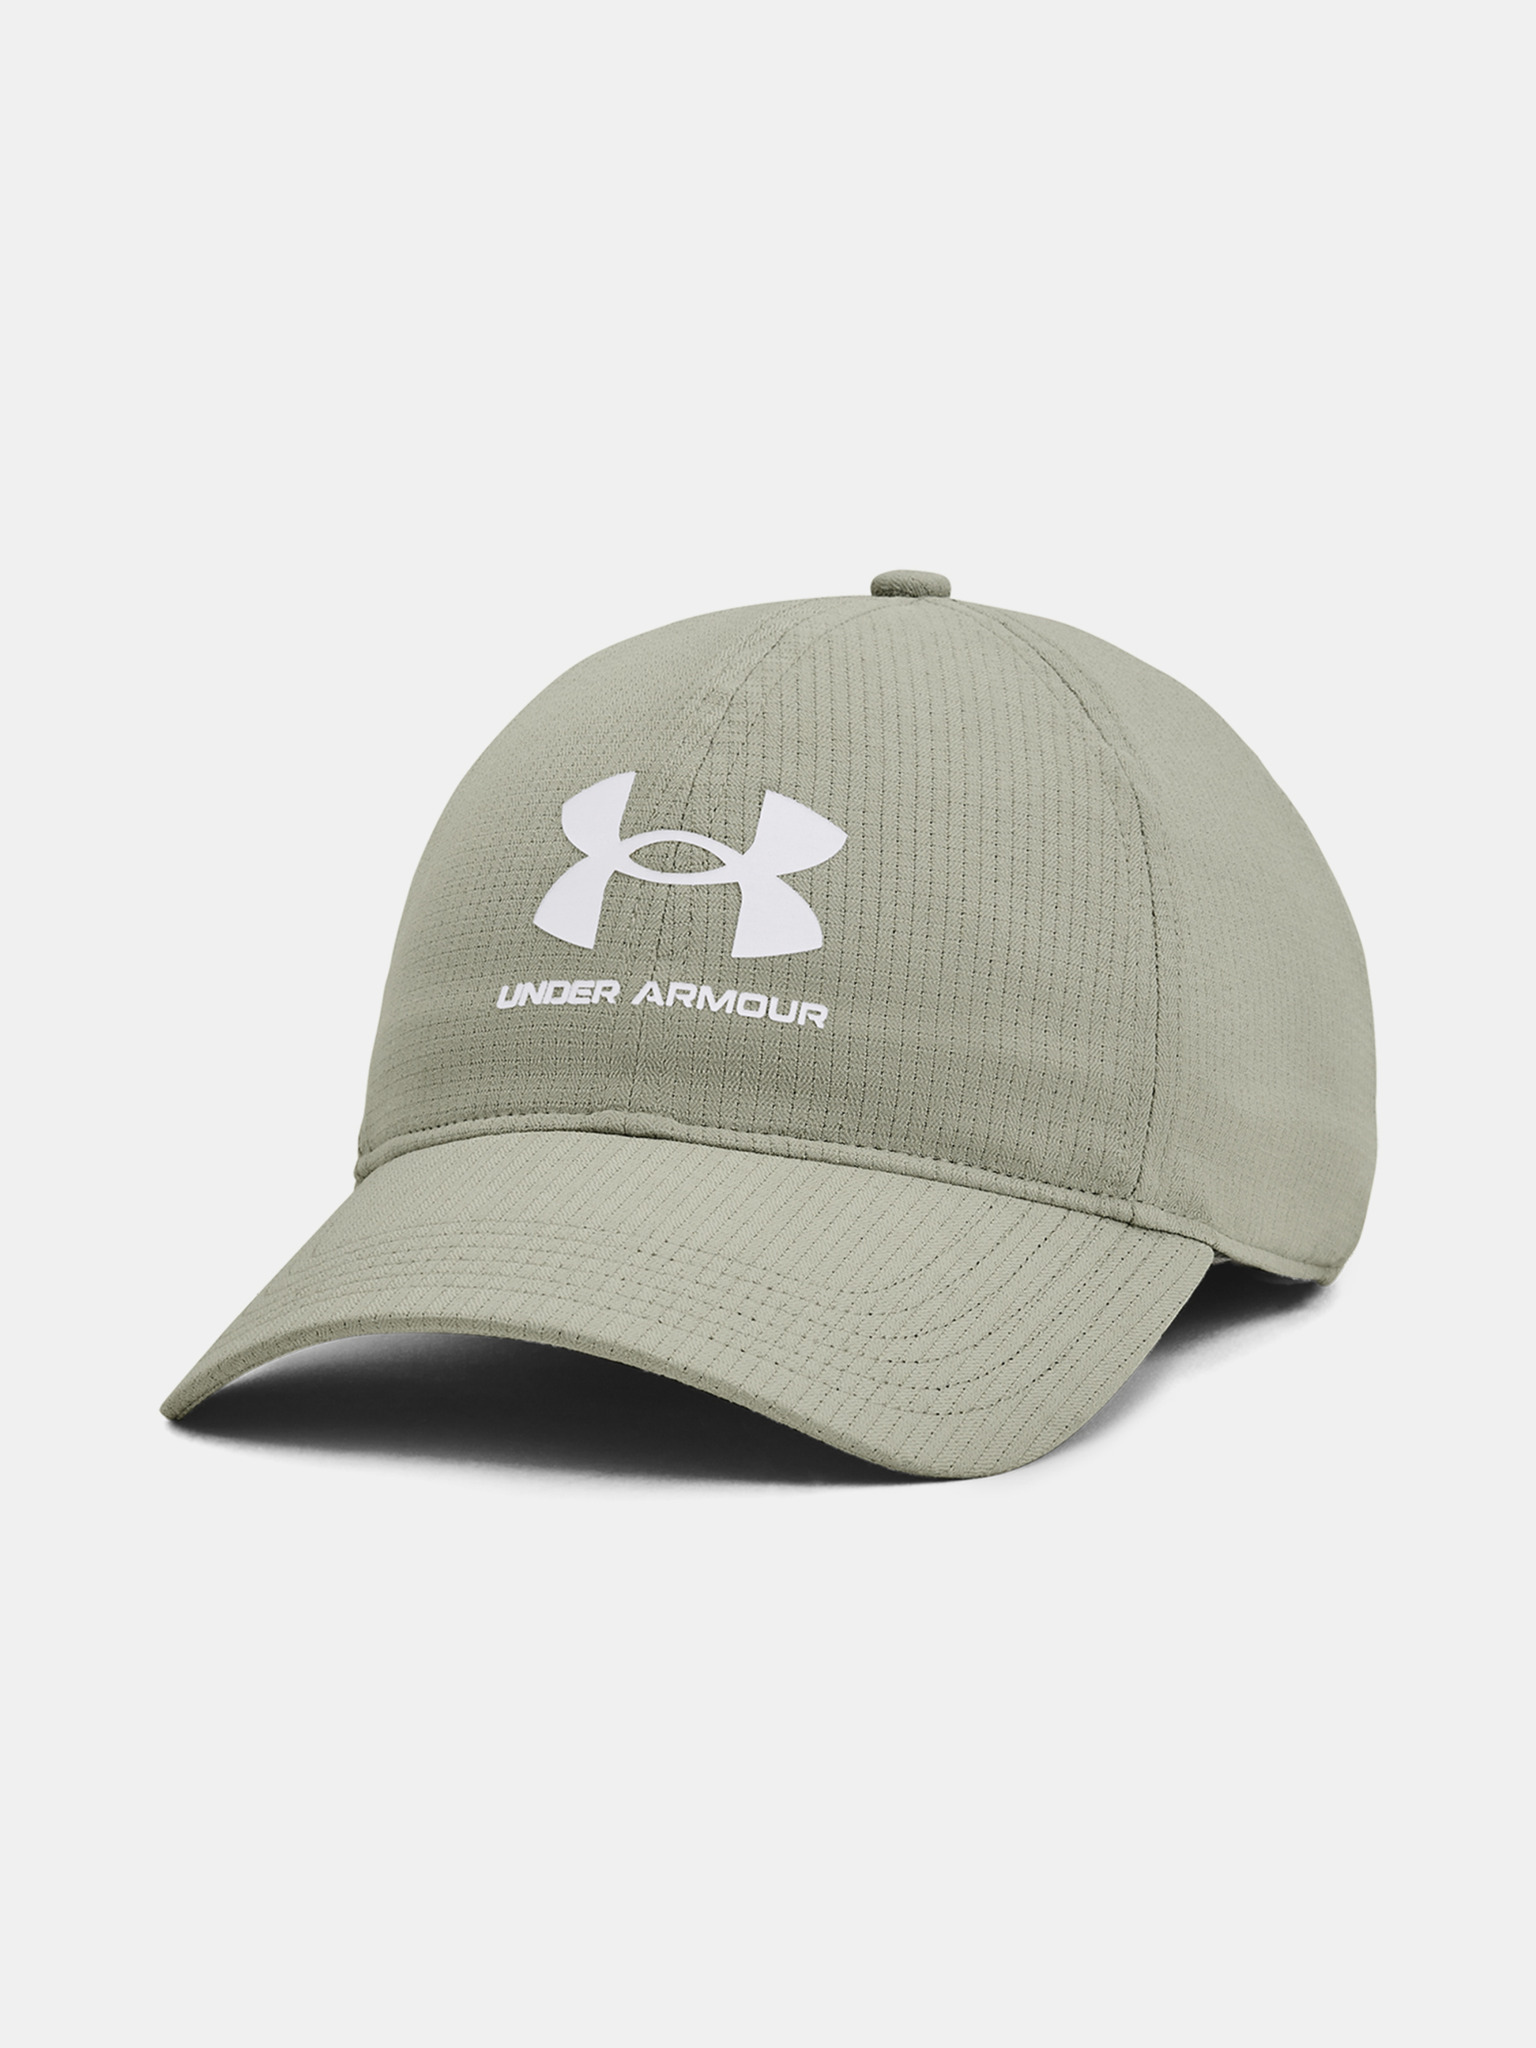 Under Armour Men's Iso-Chill ArmourVent™ Trucker Hat